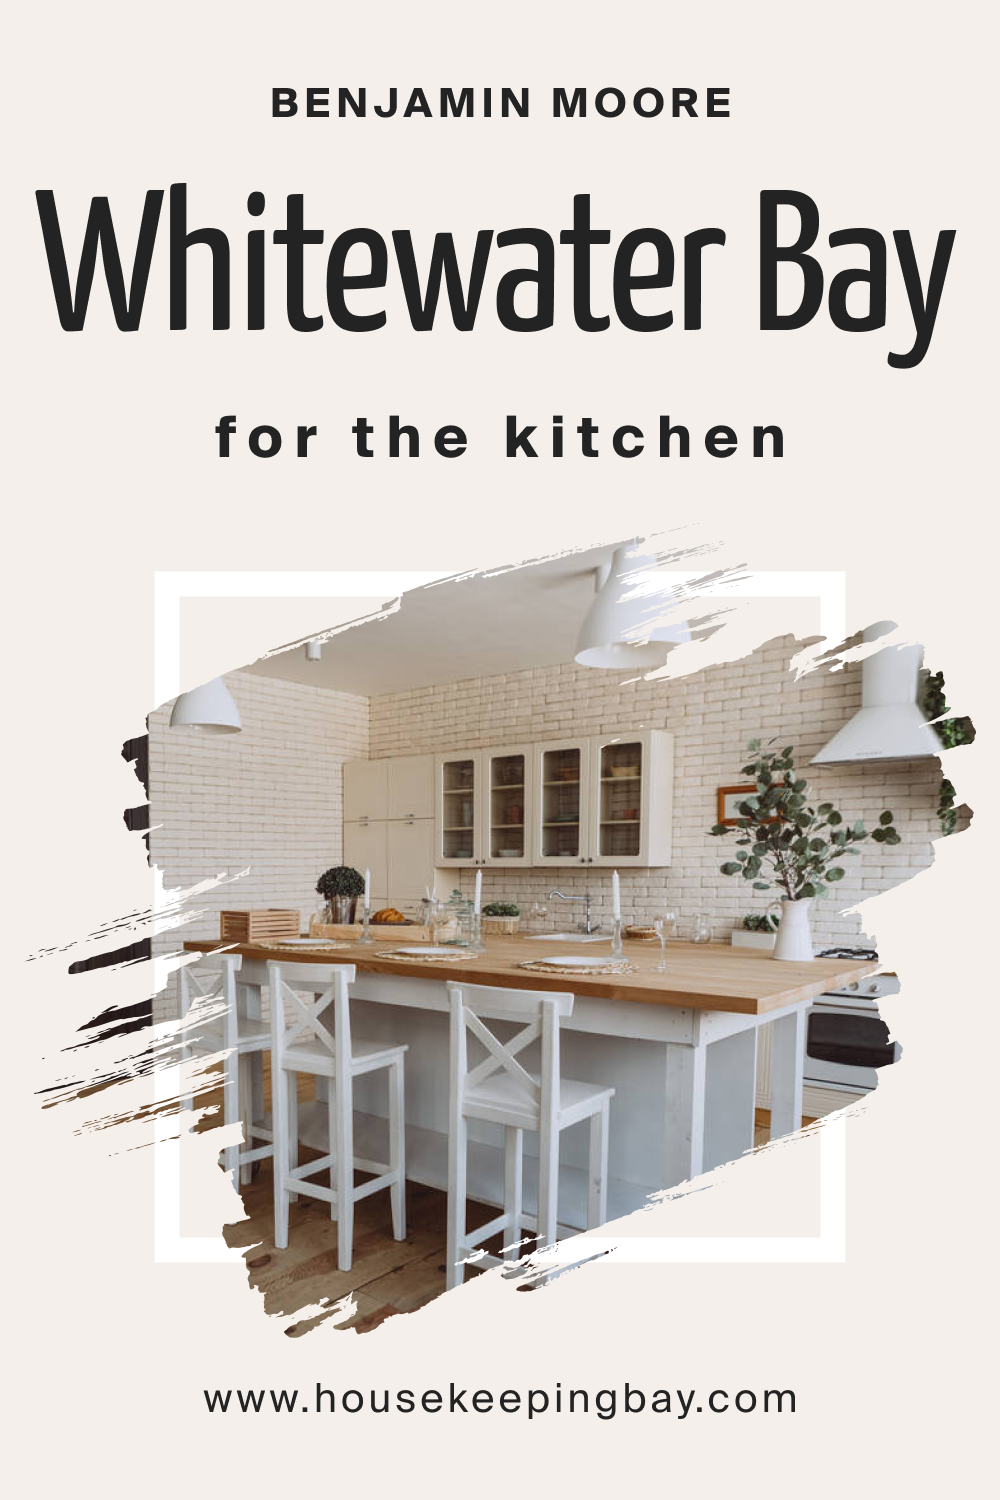 Benjamin Moore. Whitewater Bay OC 70 for the Kitchen